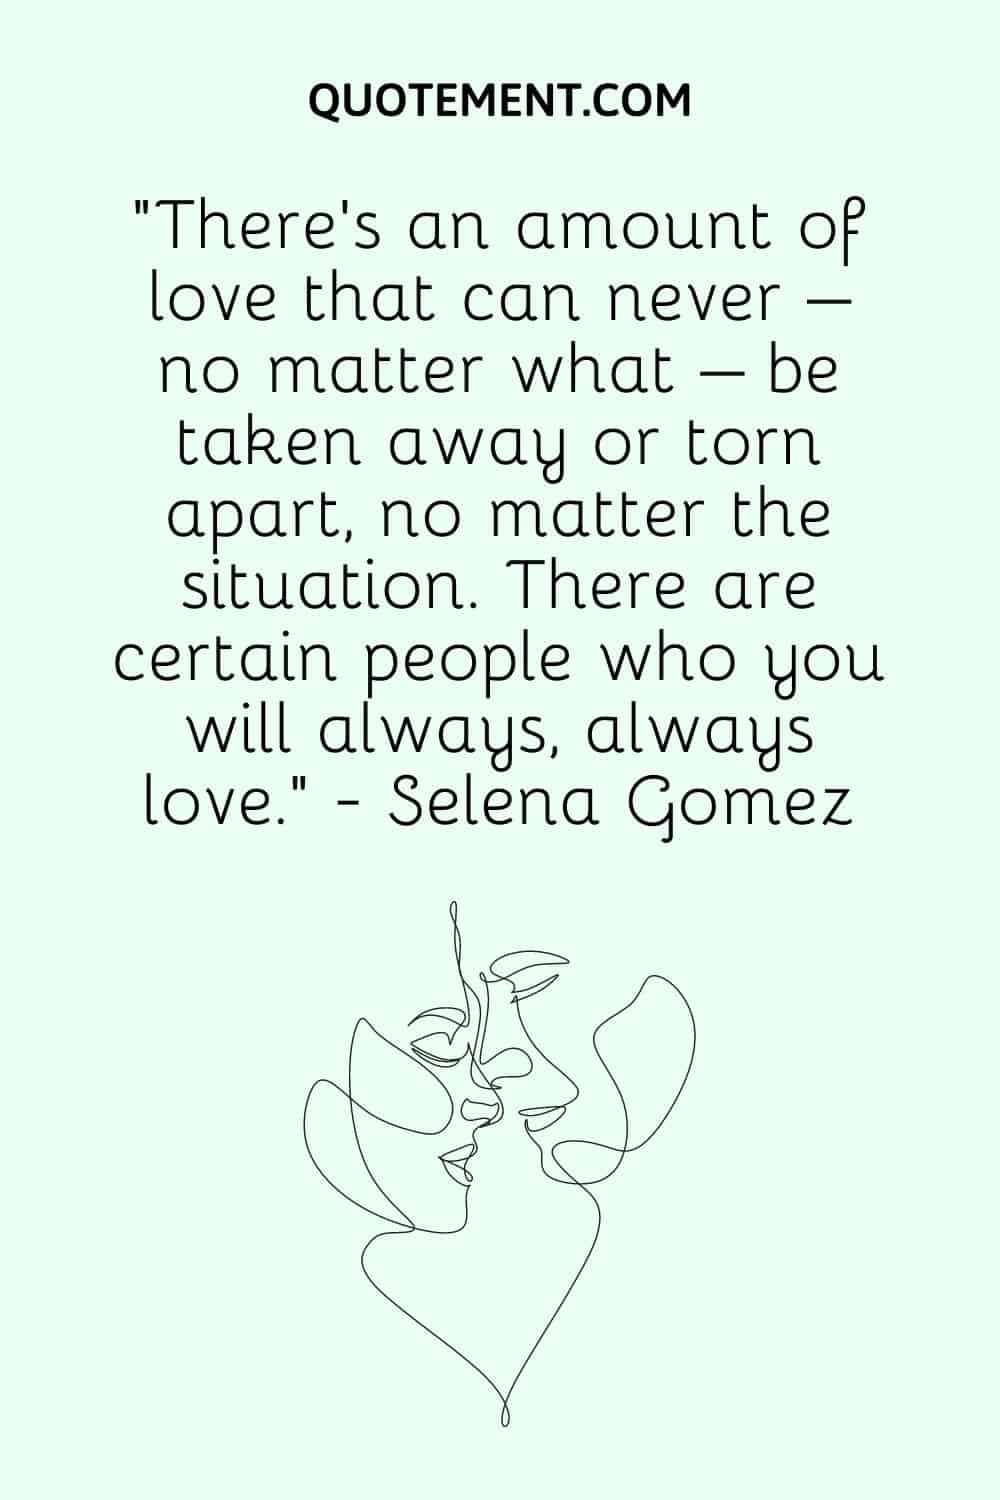 “There’s an amount of love that can never – no matter what – be taken away or torn apart, no matter the situation. There are certain people who you will always, always love.” - Selena Gomez